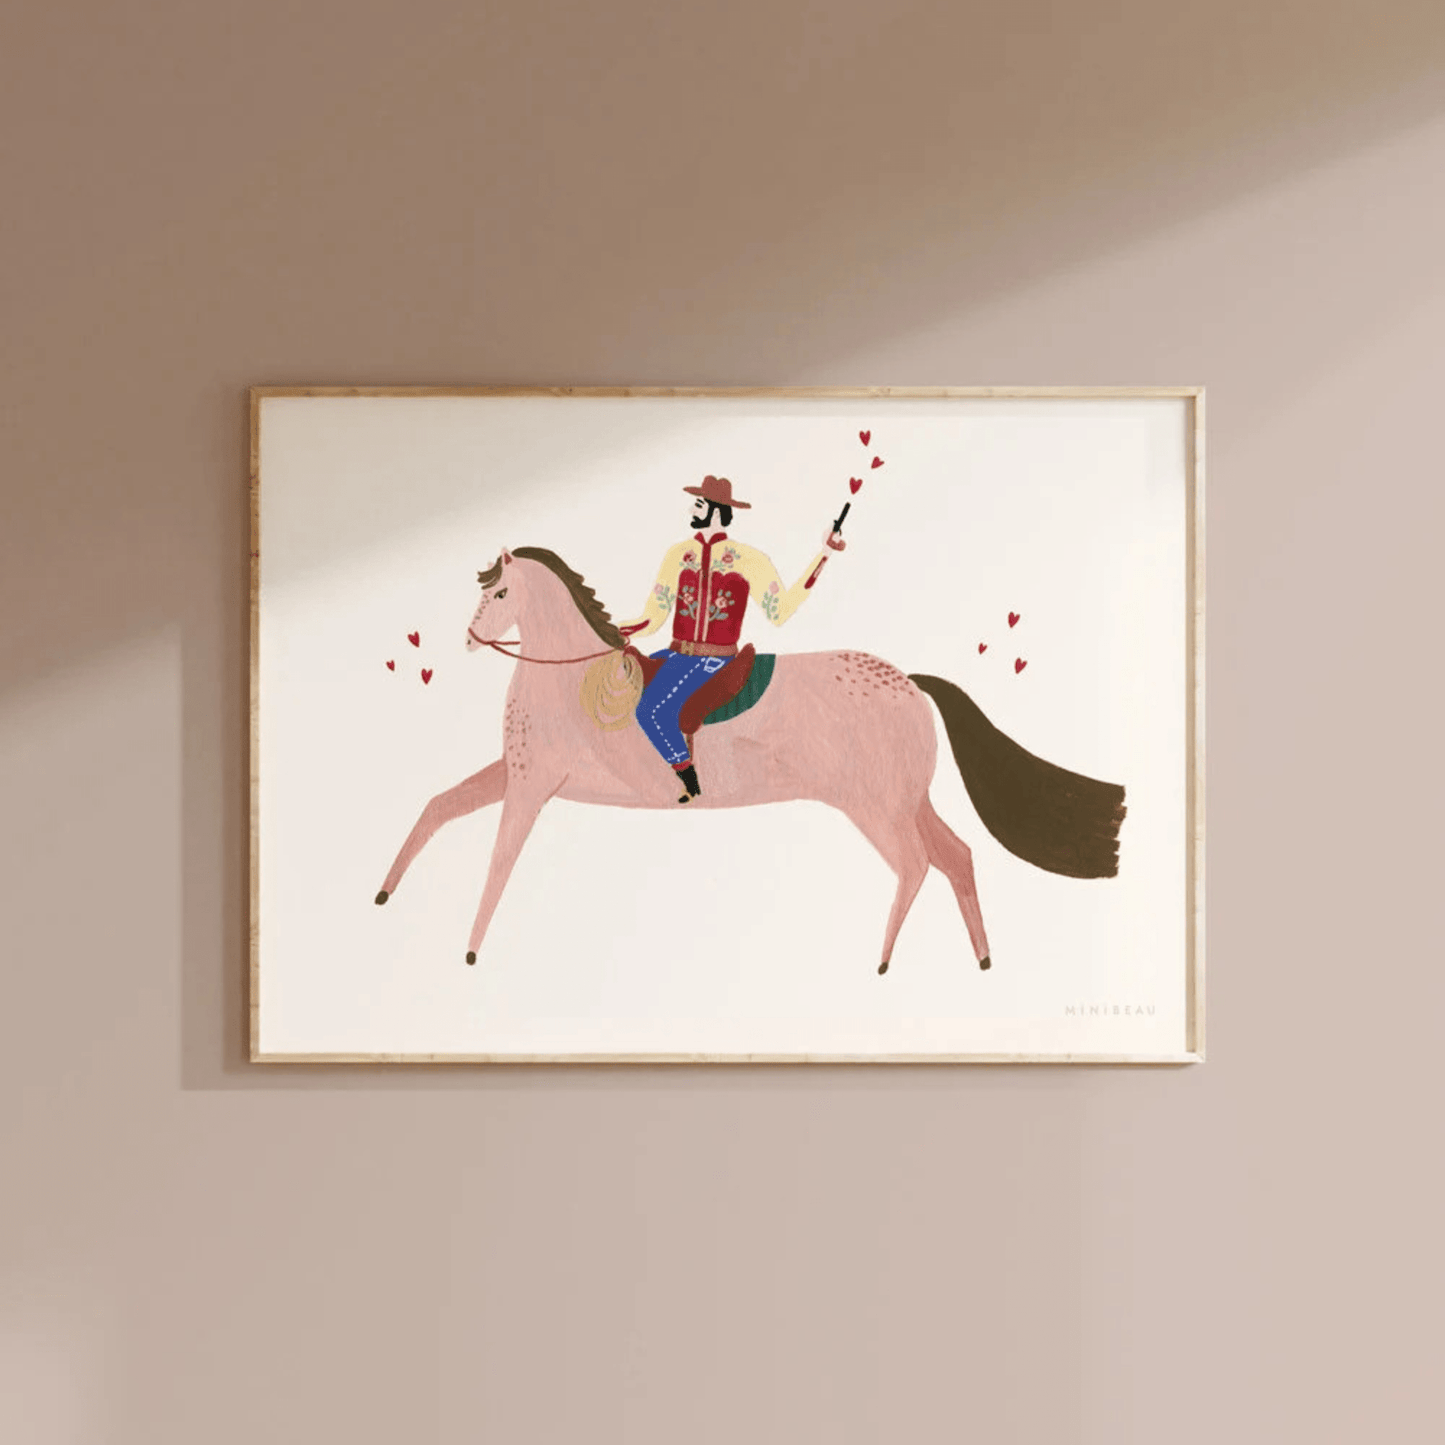 Art print hung on a light brown wall in a light wood frame. Our cowboy Art print features a cowboy, dressed in a floral shirt, on a brown horse, shooting red hearts from a pistol on a neutral background.